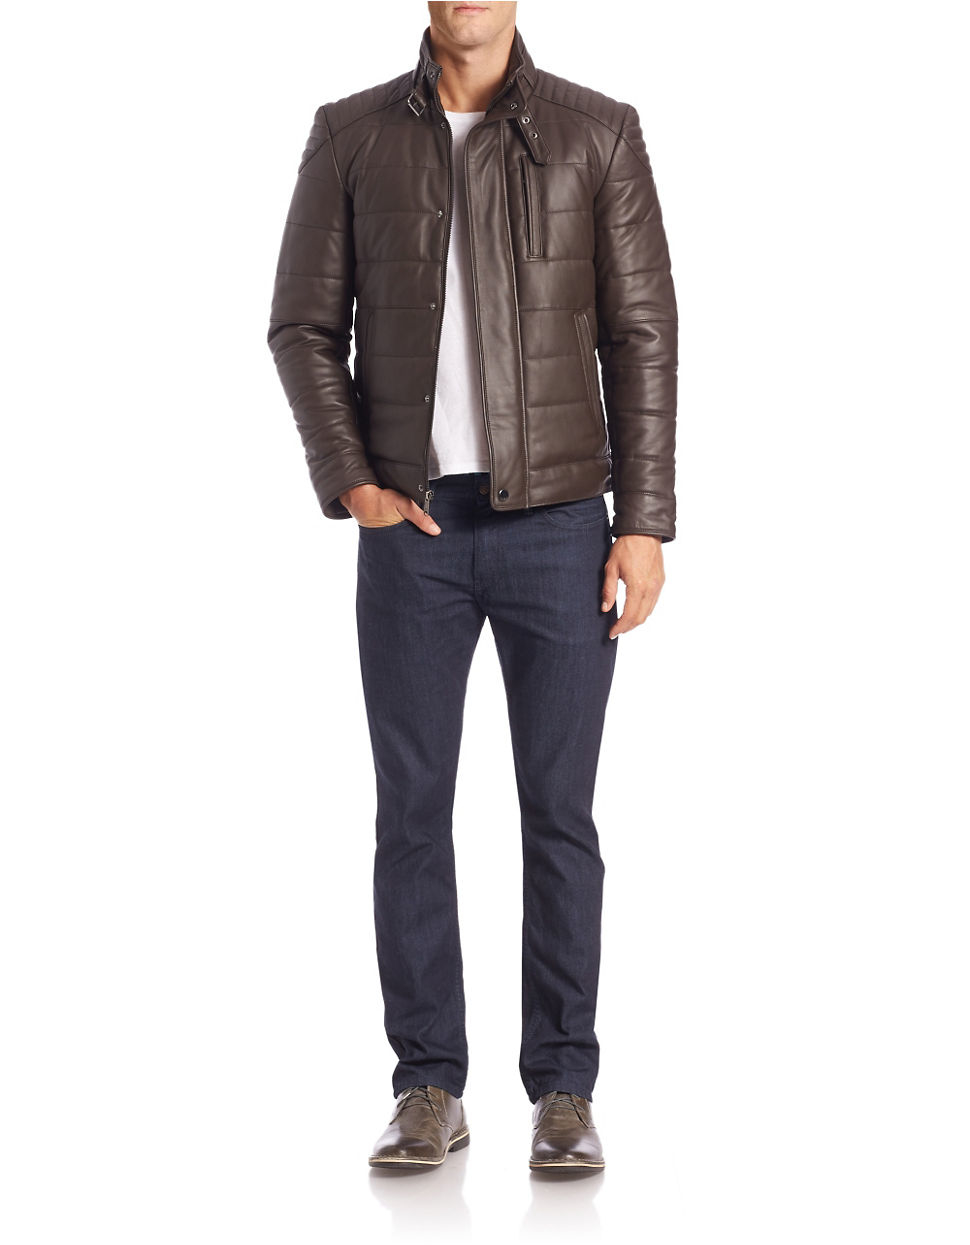 7 For All Mankind Quilted Leather Jacket in Brown for Men - Lyst